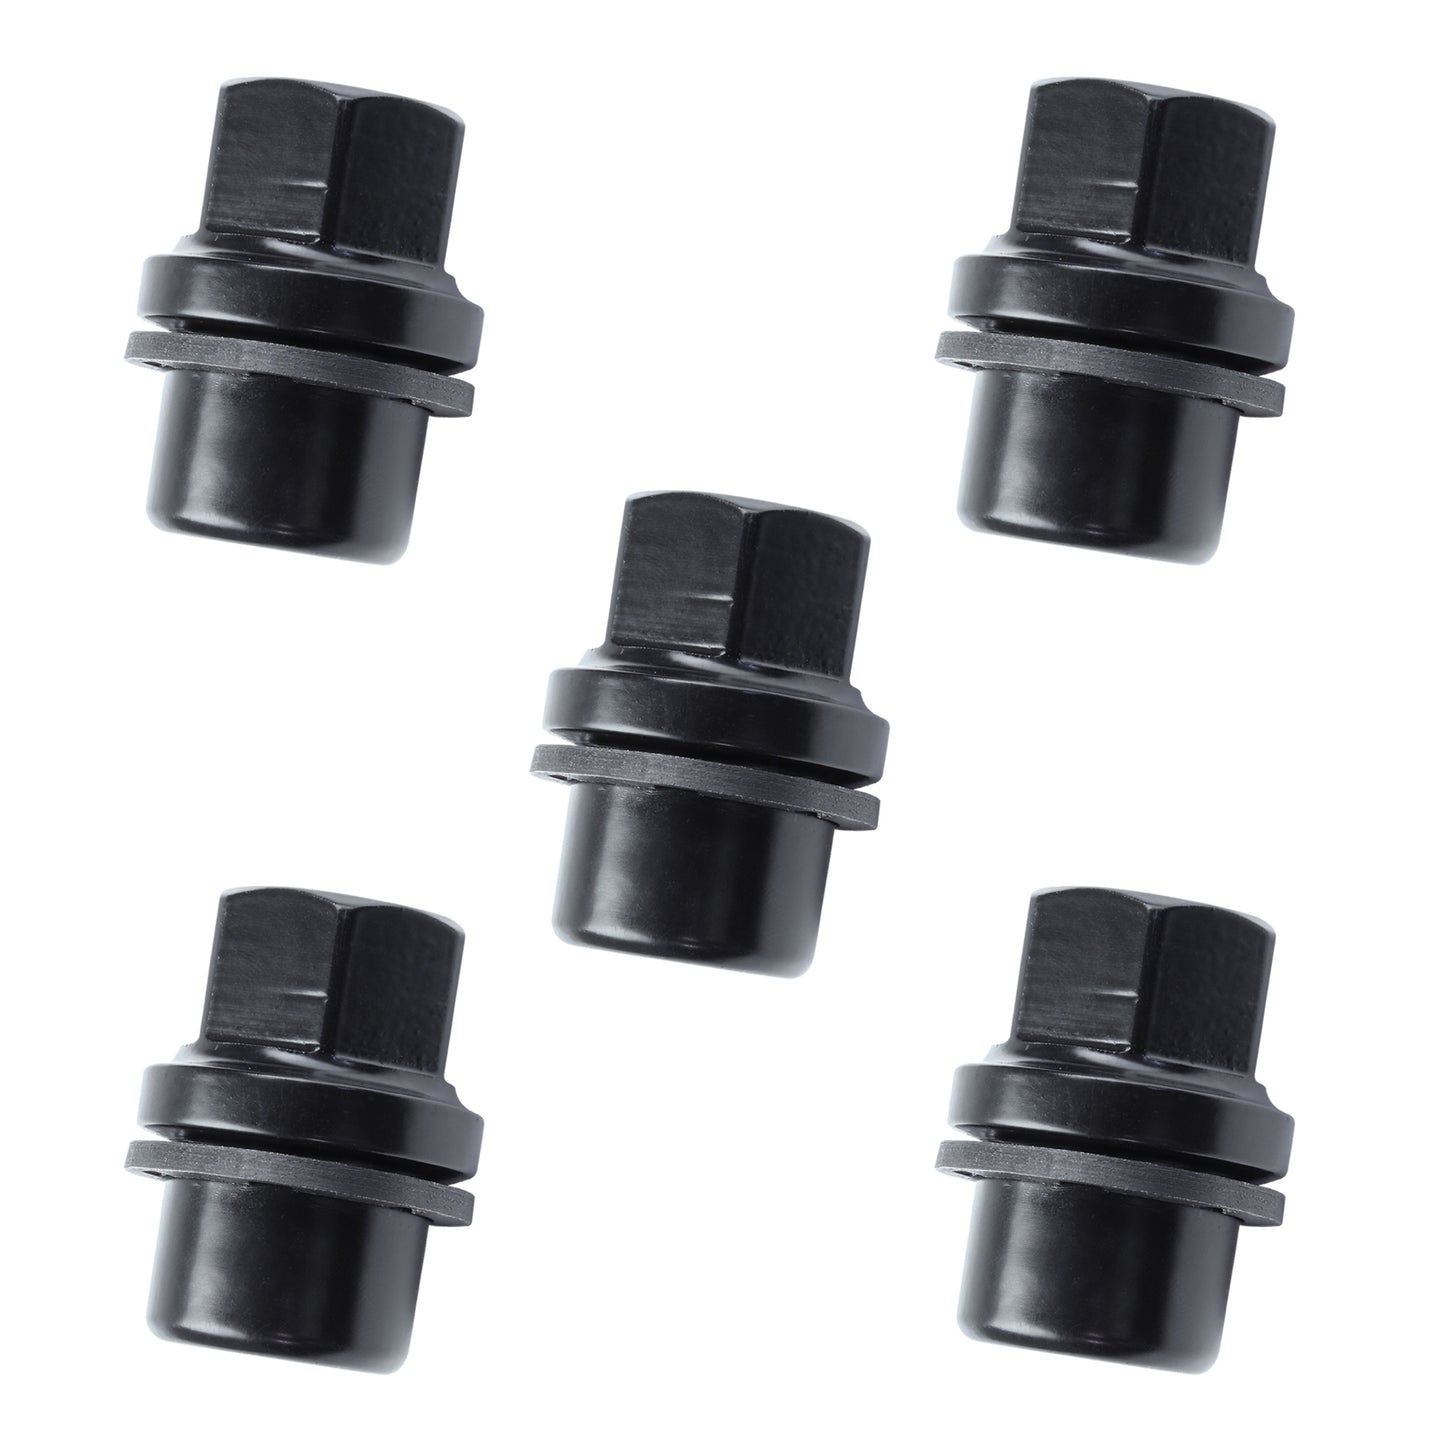 Black Alloy Wheel Nuts 5pc kit for Land Rover Discovery 1 - Alloy wheel type